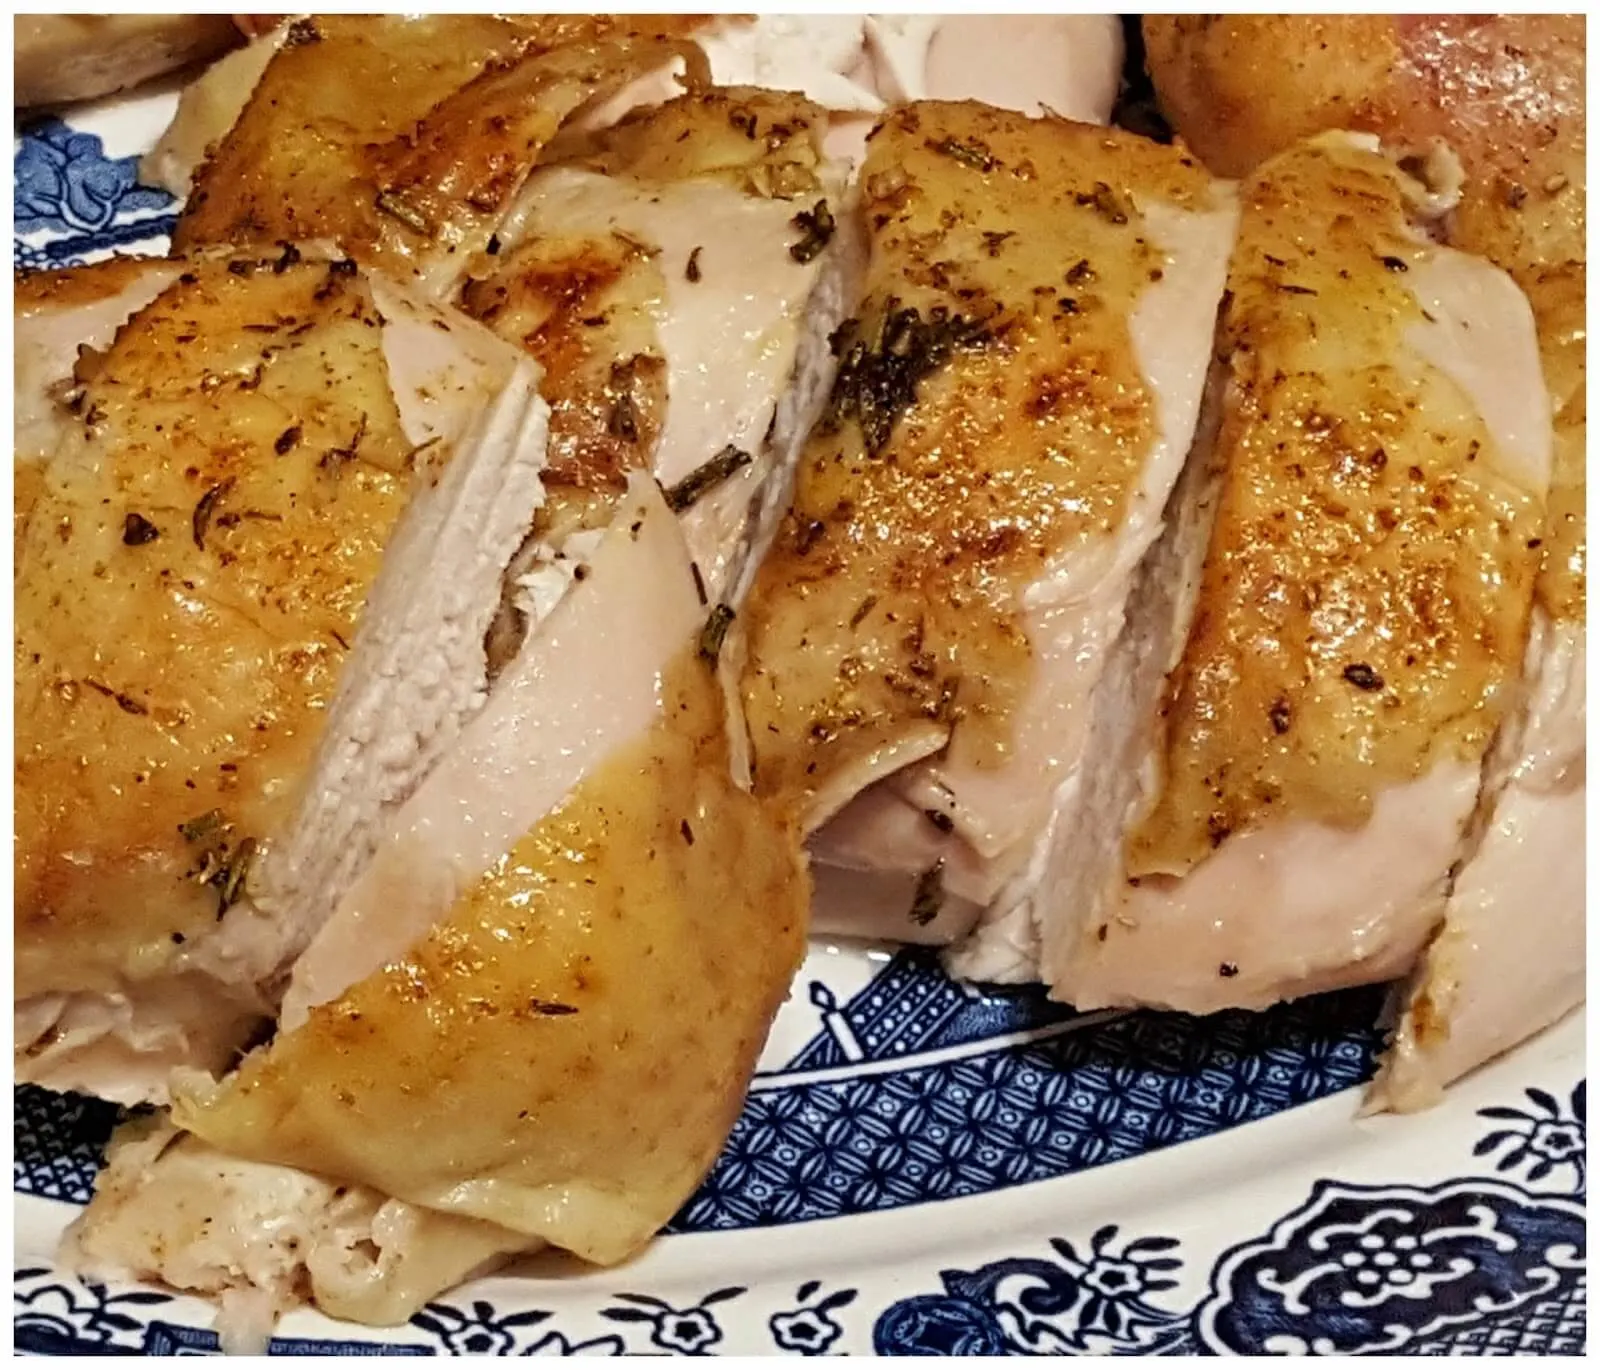 Perfectly roasted chicken